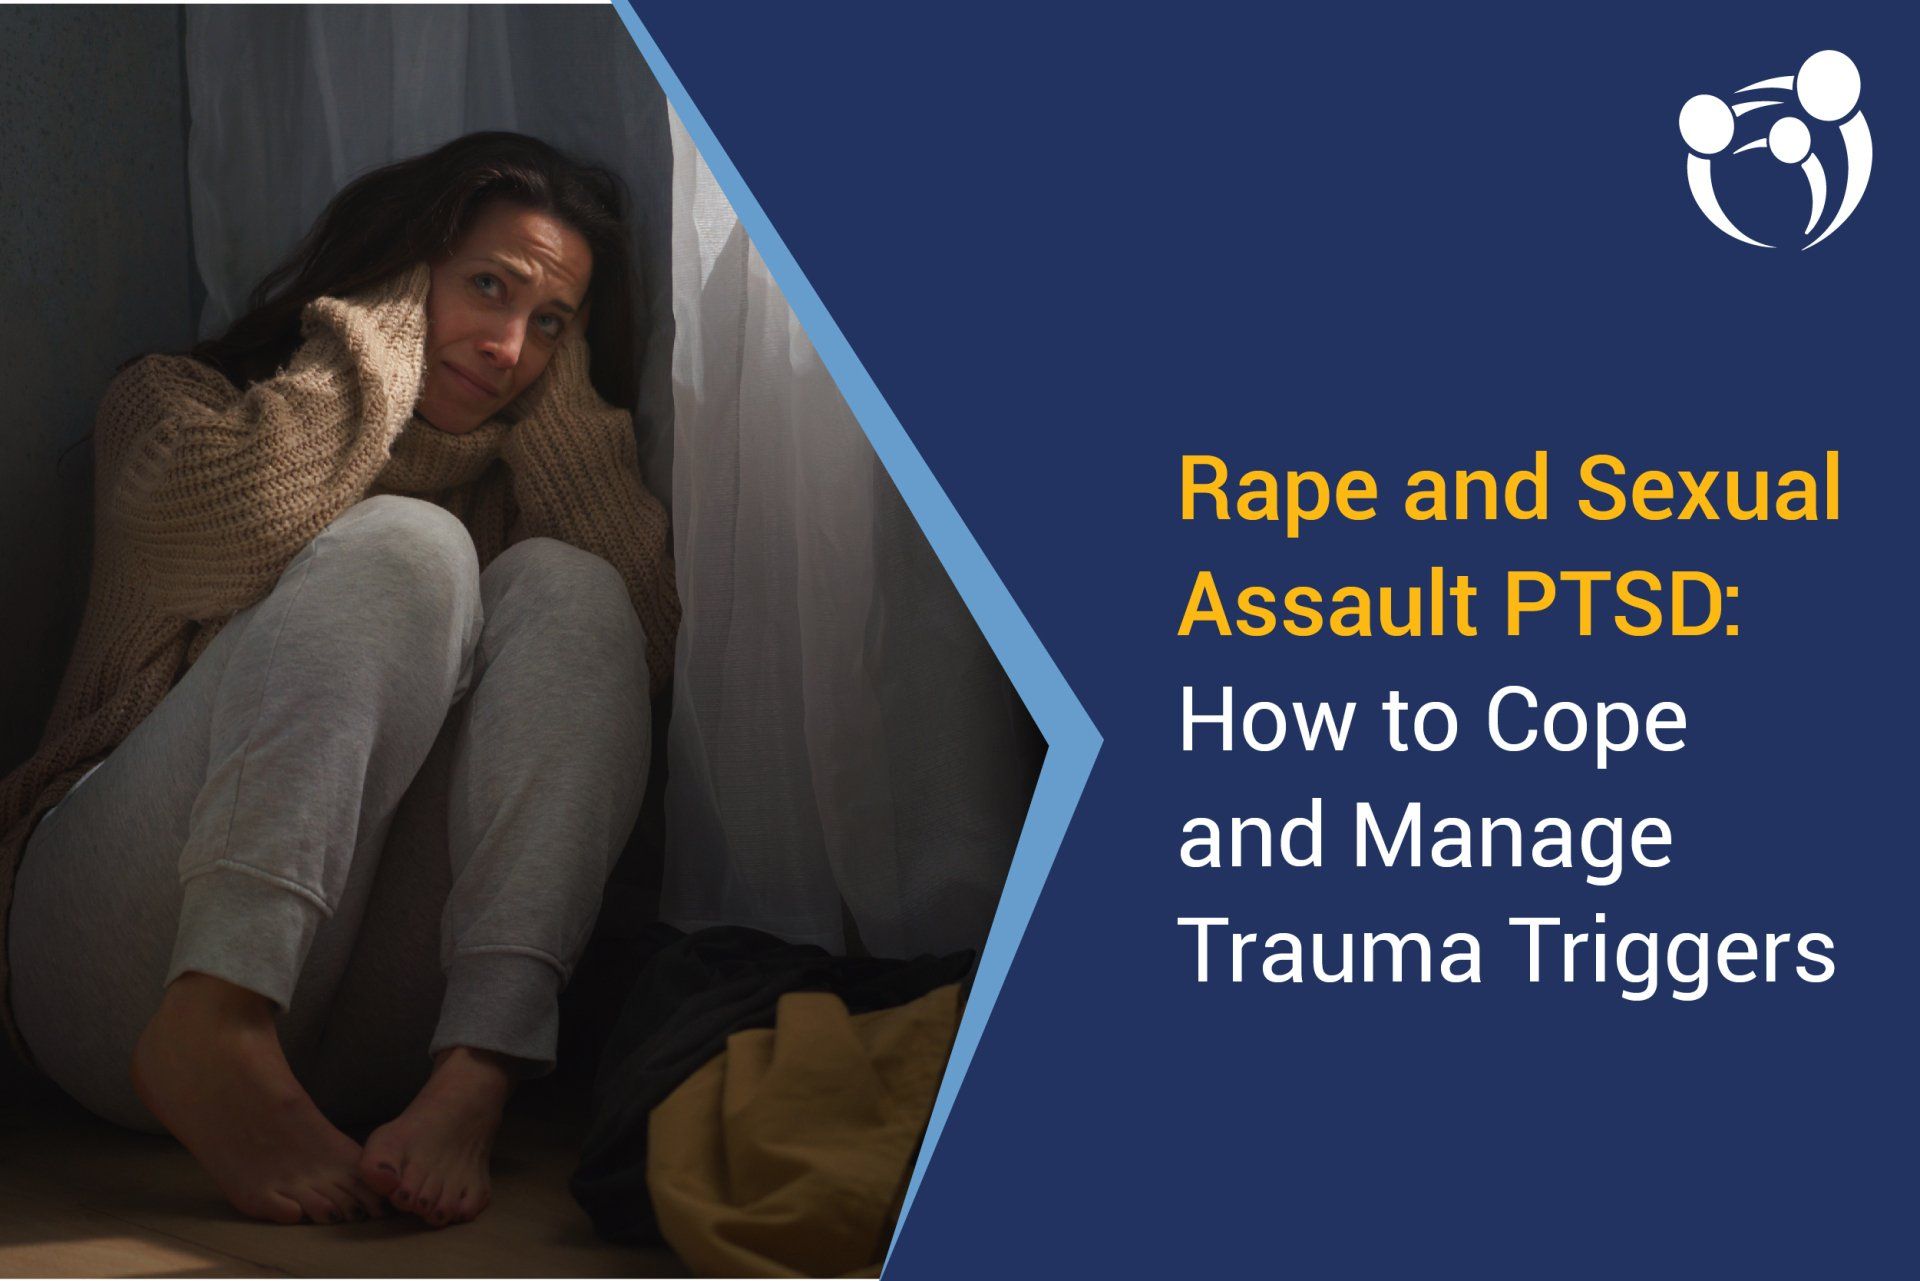 Rape and Sexual Assault PTSD: How to Cope and Manage Trauma Triggers